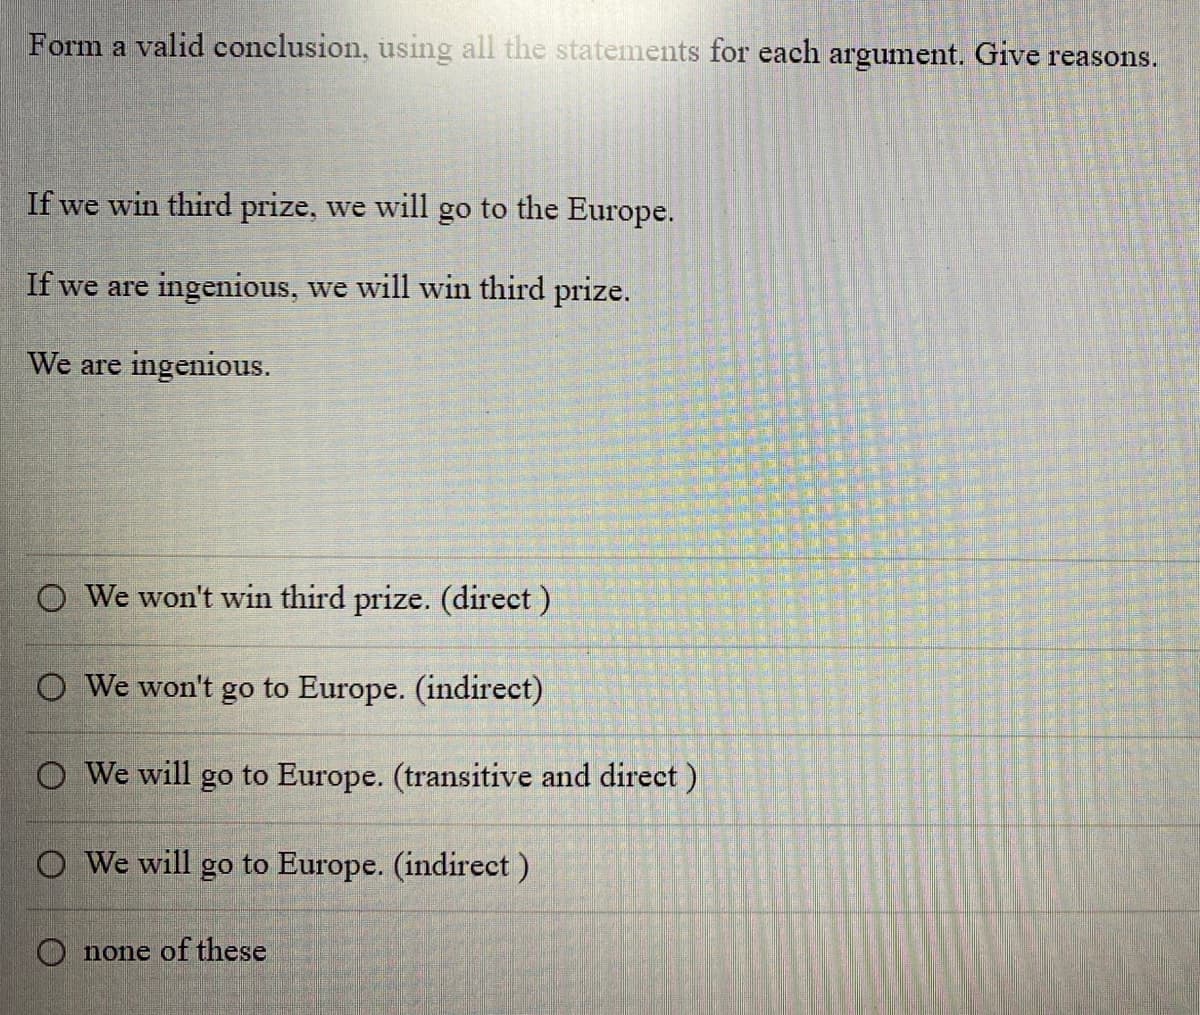 Form a valid conclusion, using all the statements for each argument. Give reasons.
If we win third prize, we will go to the Europe.
If we are ingenious, we will win third prize.
We are ingenious.
O We won't win third prize. (direct)
O We won't go to Europe. (indirect)
O We will go to Europe. (transitive and direct)
O We will go to Europe. (indirect)
Onone of these